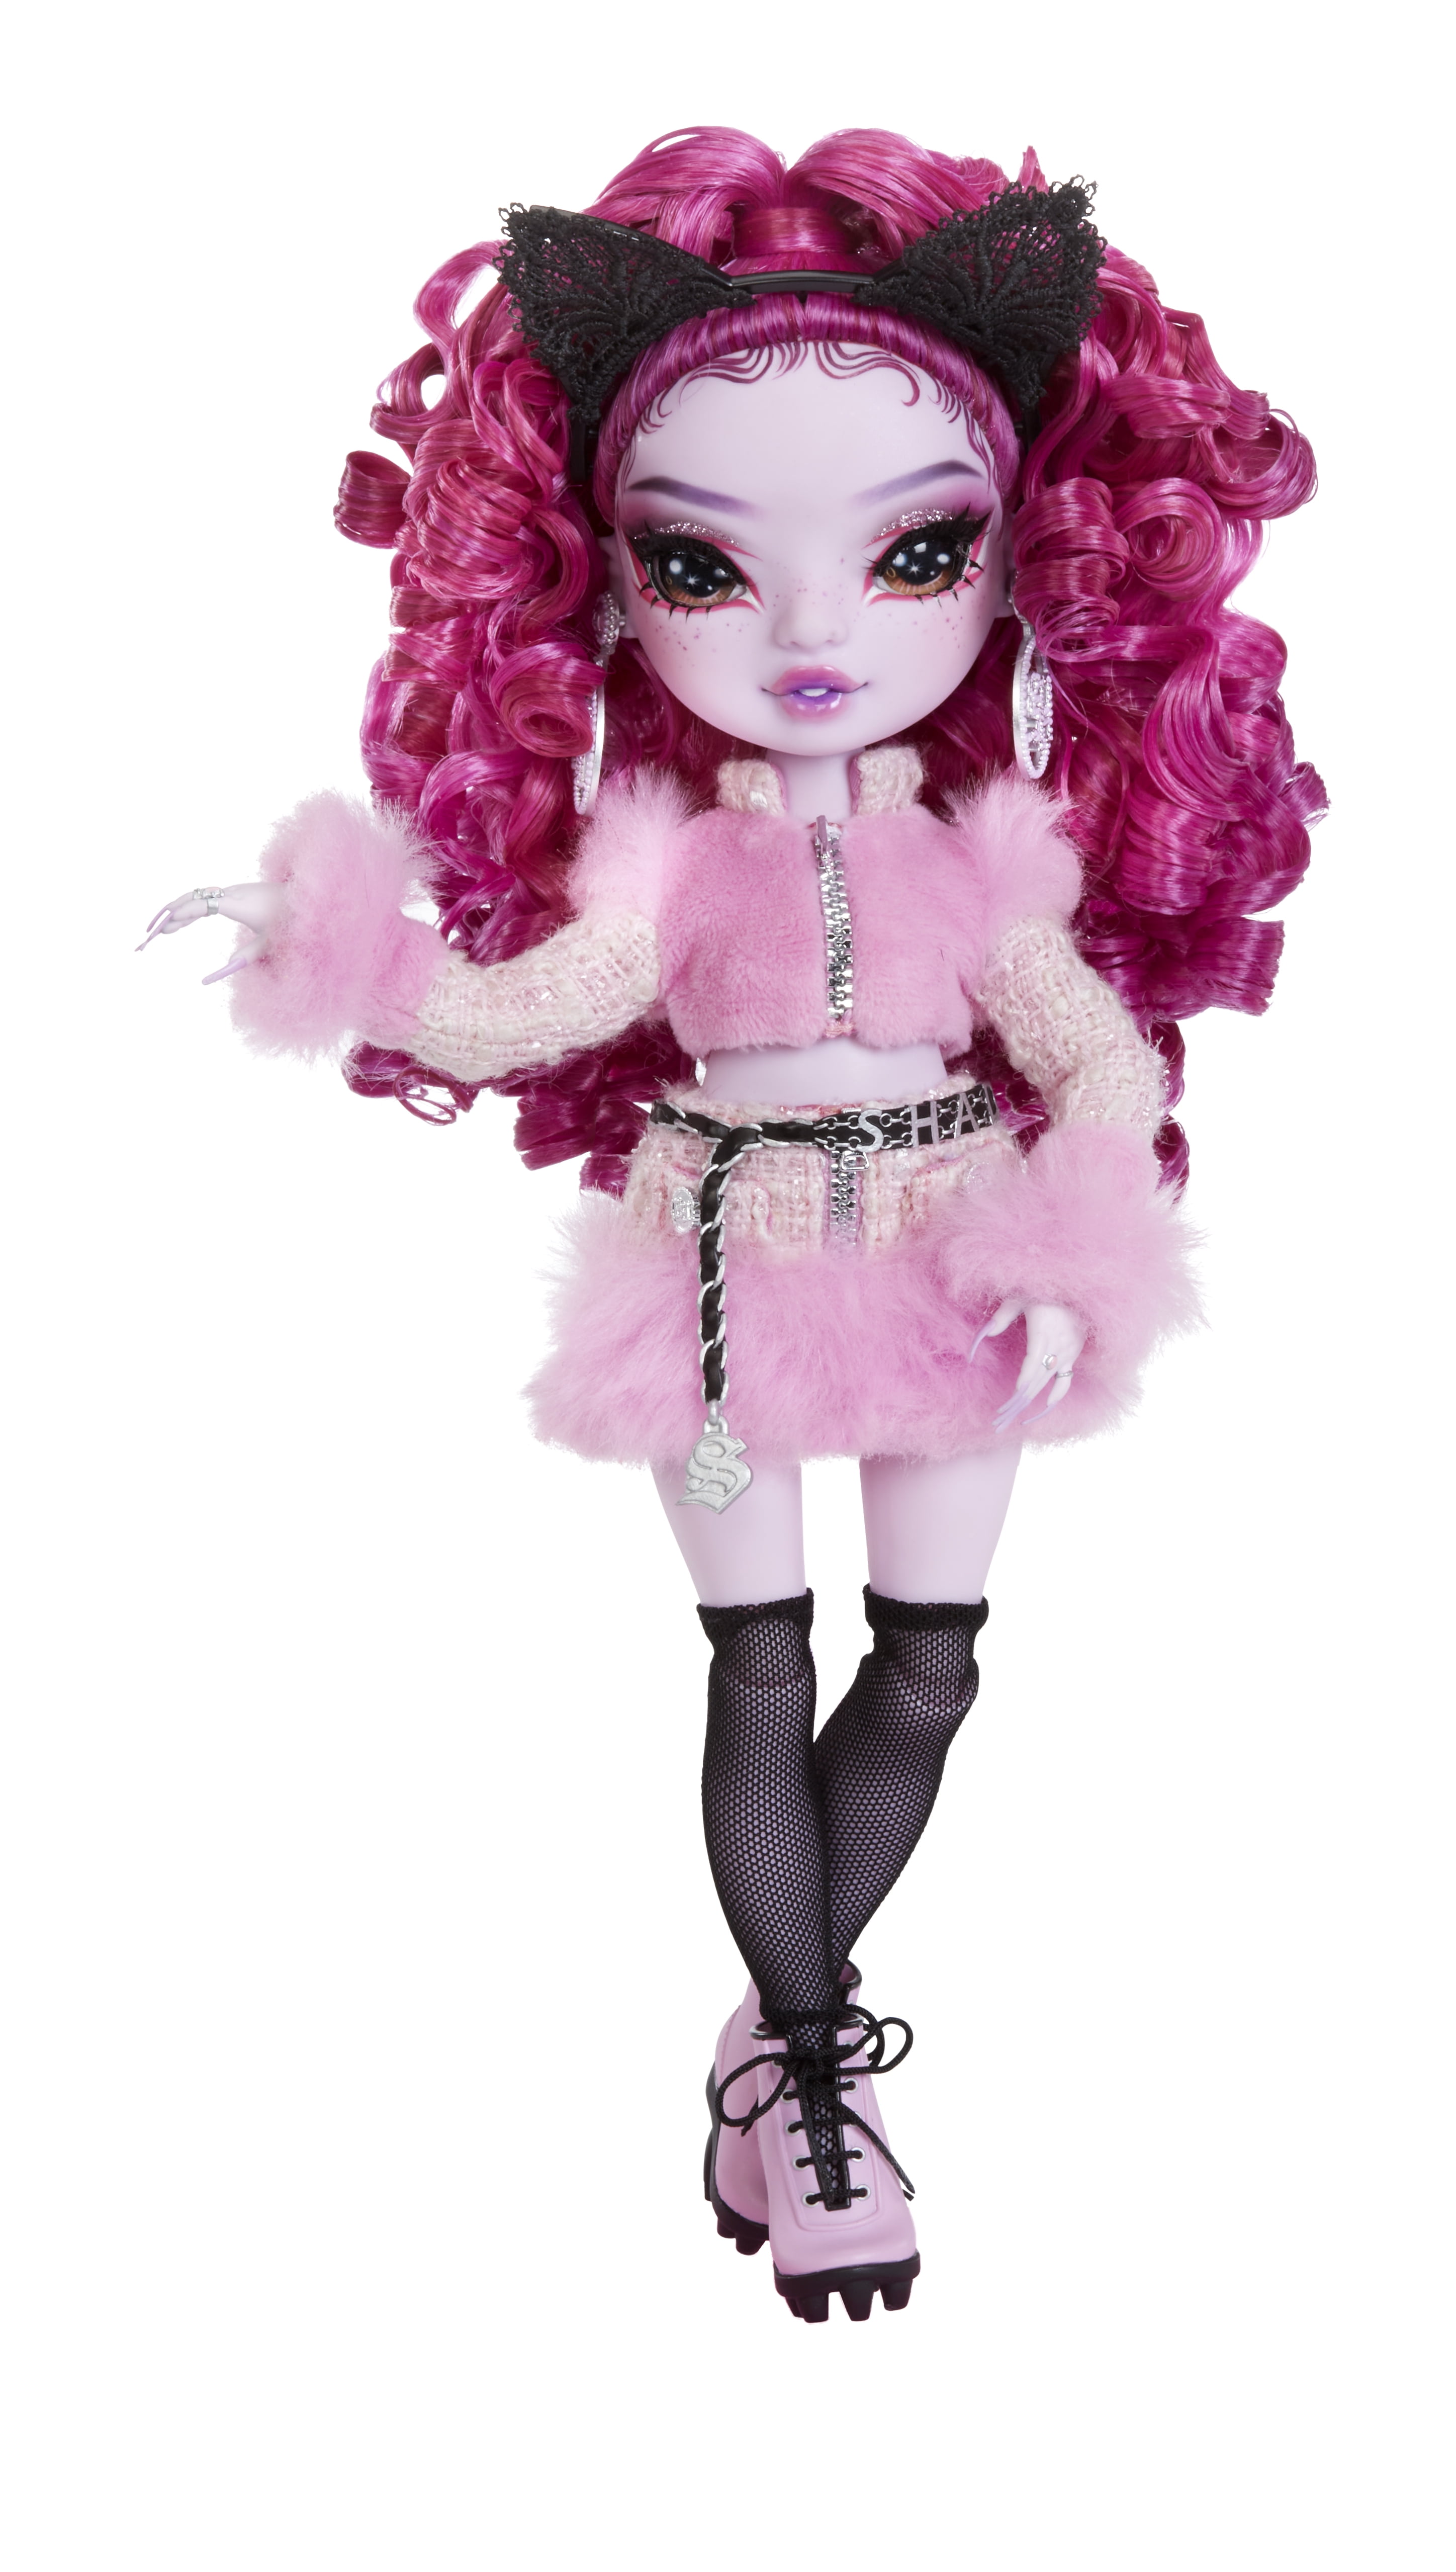 Rainbow High Rainbow Vision COSTUME BALL Shadow High – Lola Wilde (Pink) Fashion Doll. 11 inch Were-cat Themed Costume and Accessories. Toys for Kids, Great Gift for Kids 6-12 Years Old & Collectors